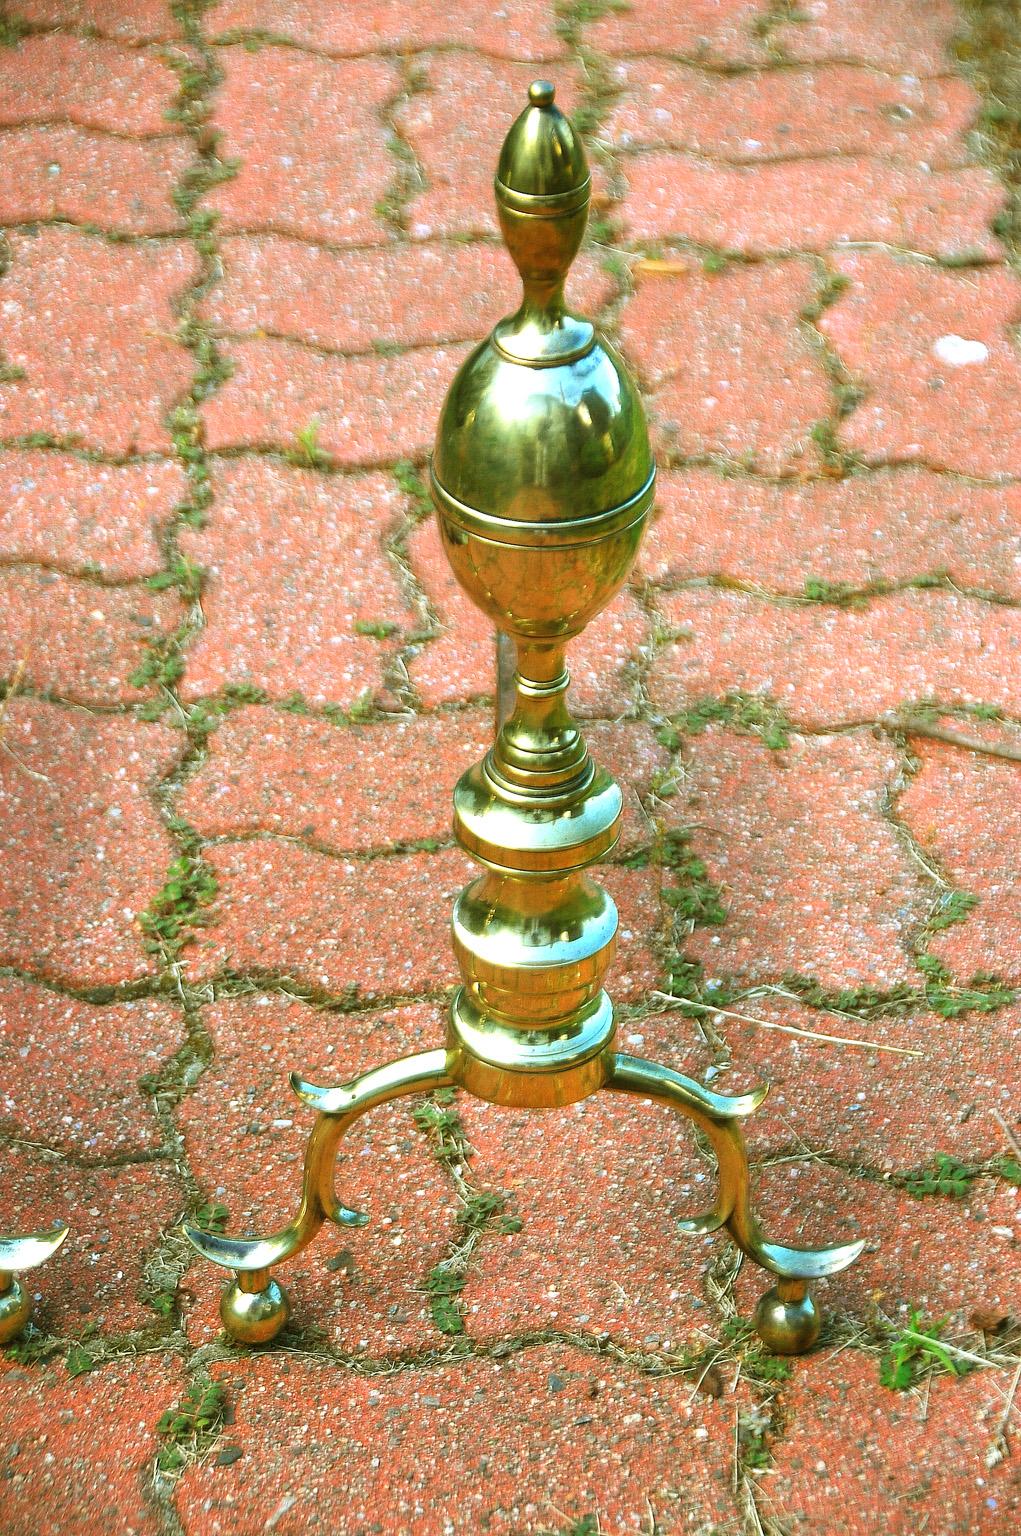 American Federal period cast brass double lemon top andirons. These substantial andirons have belting to both levels of lemons, are seamed, stand on turned bold columns with spurred legs, supported by ball feet. The wrought iron stepped log holders